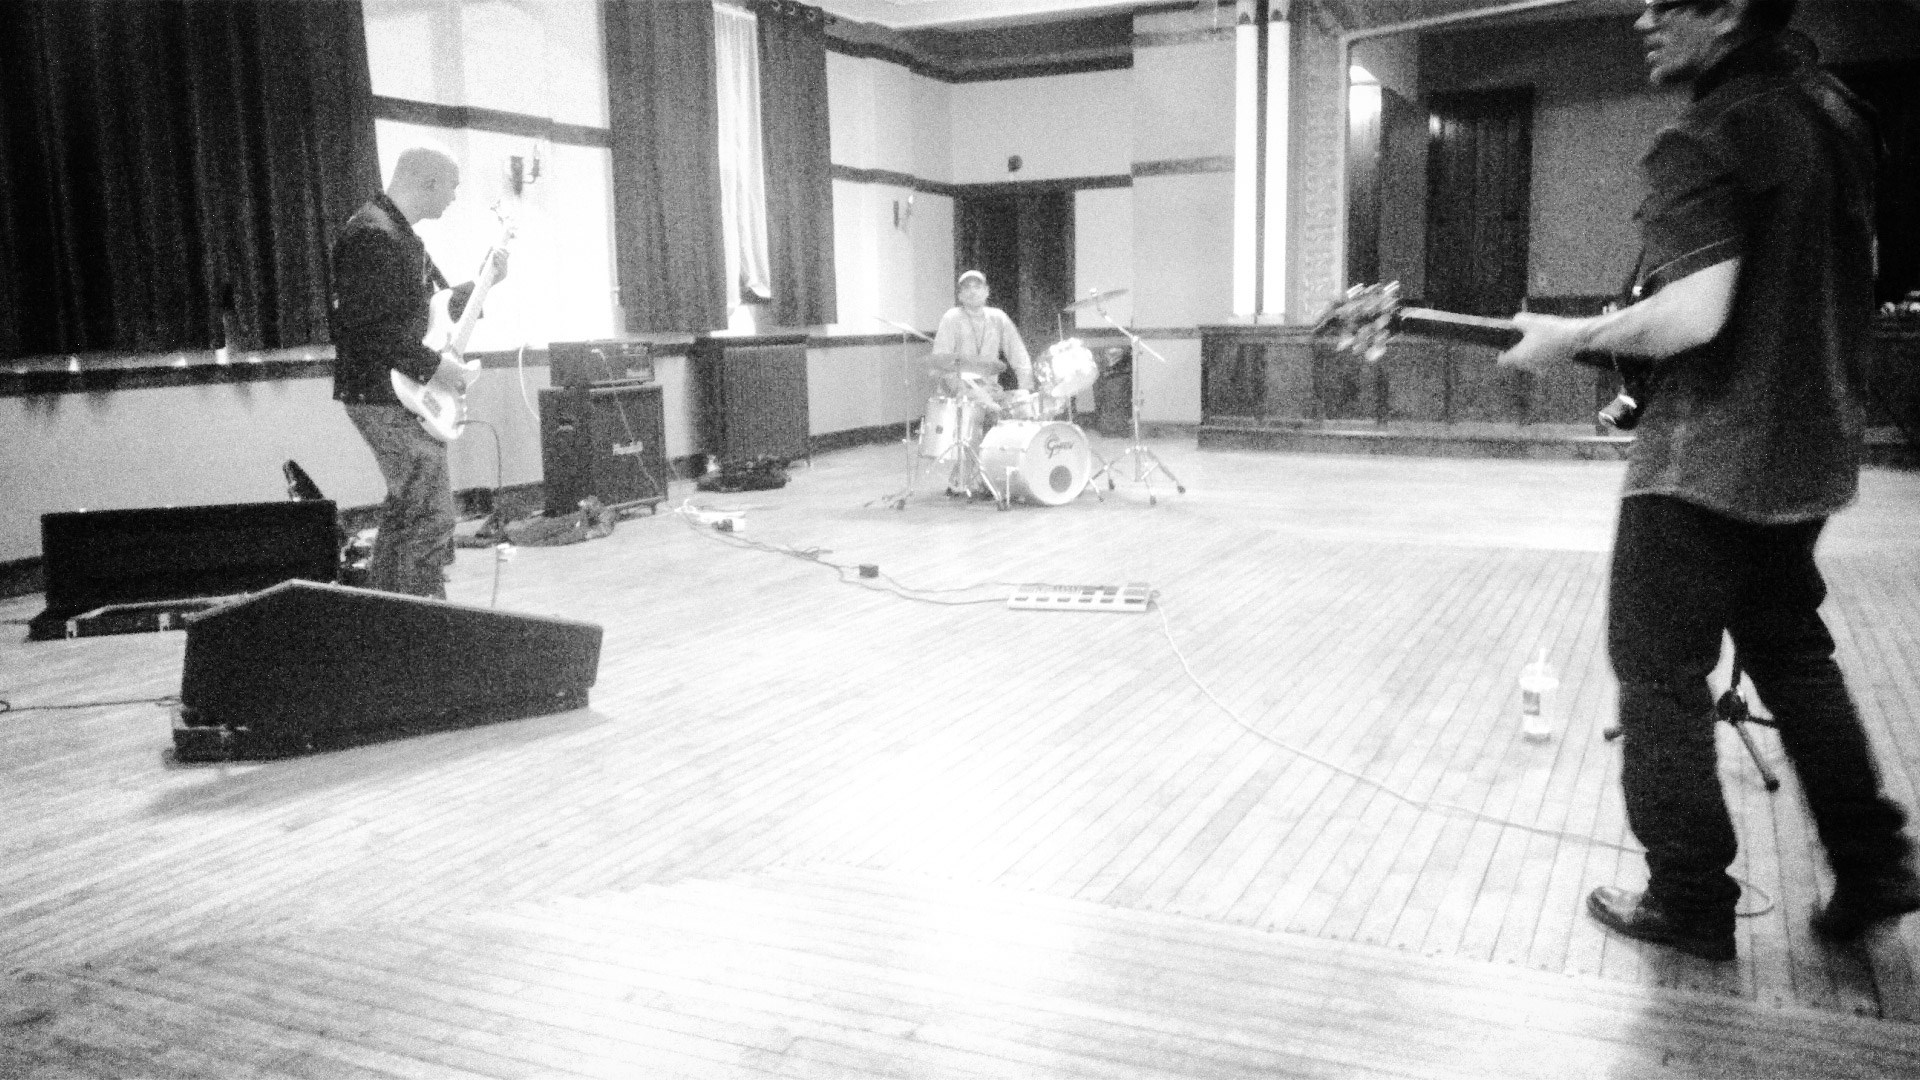 The Indie Rock band (founding line-up), The Three-Five-Sevens, rehearse at a Masonic Temple